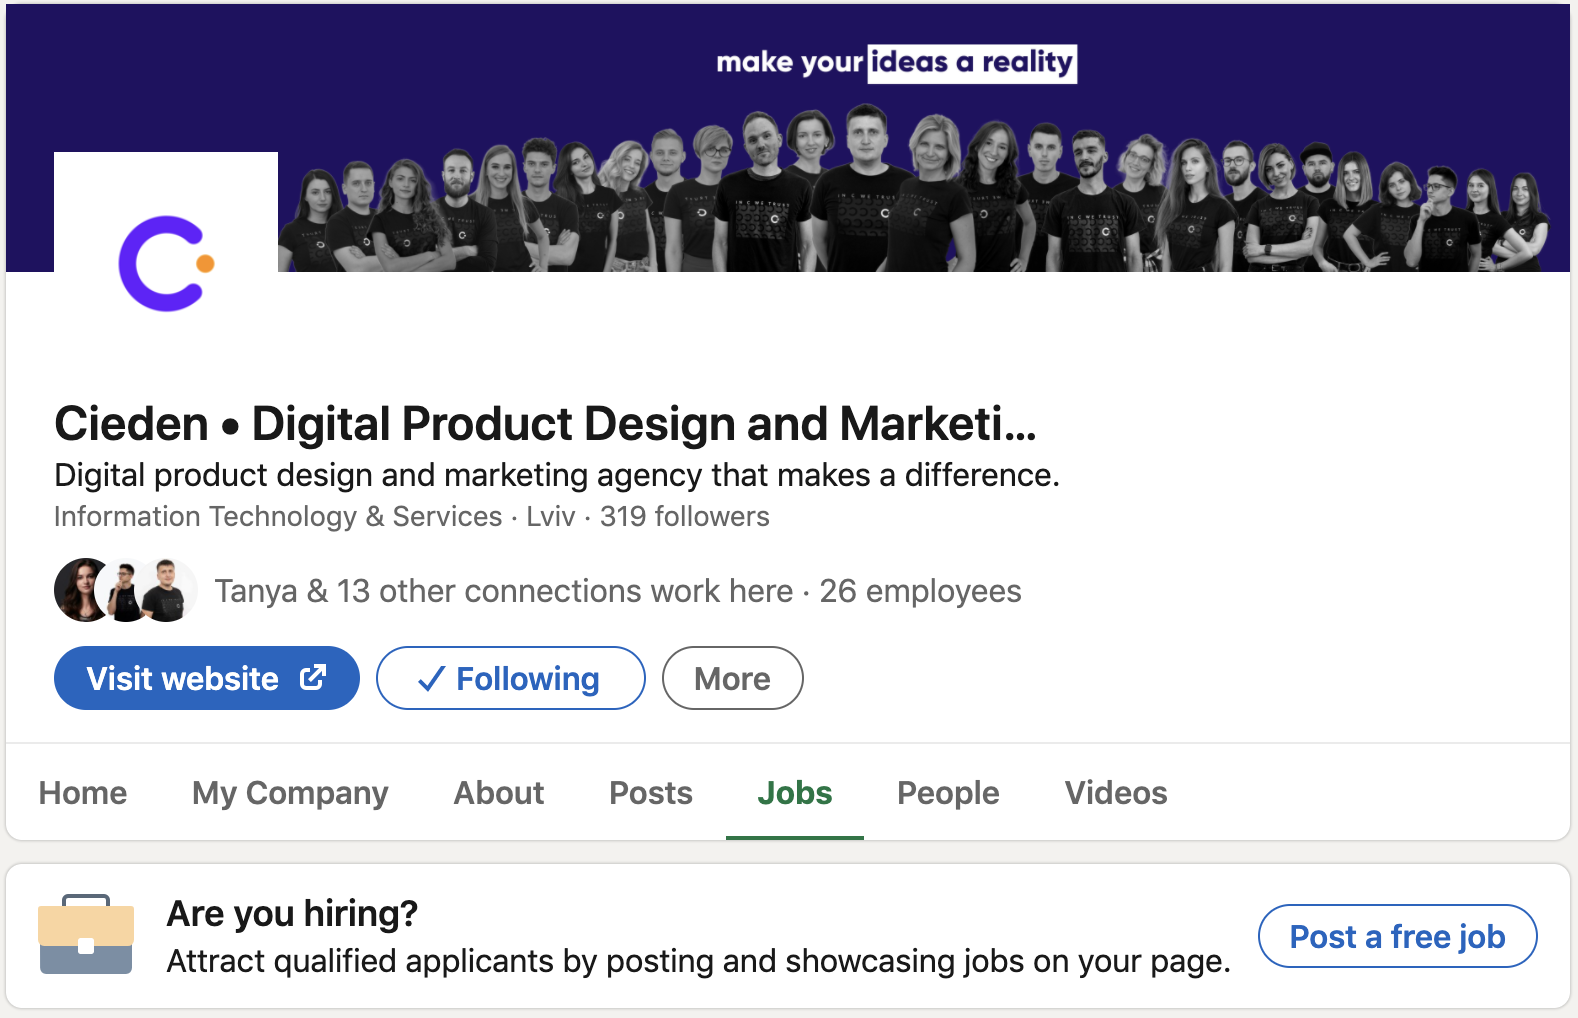 Company pages and job posting example from Linkedin.